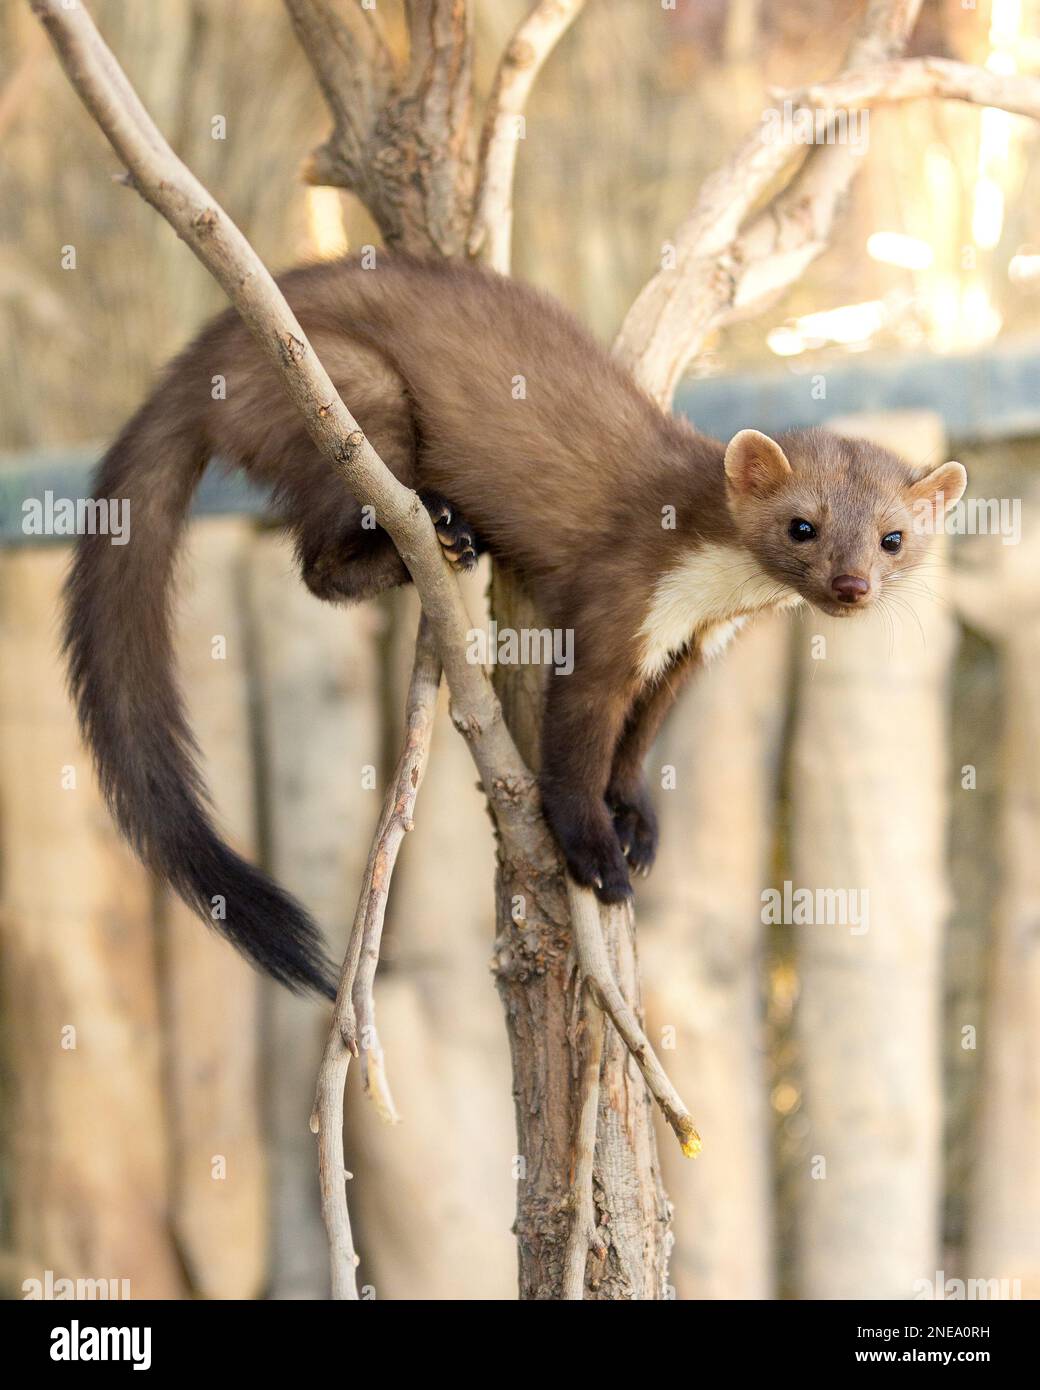 A Brown Weasel Curled Up on a Branch Stock Photo